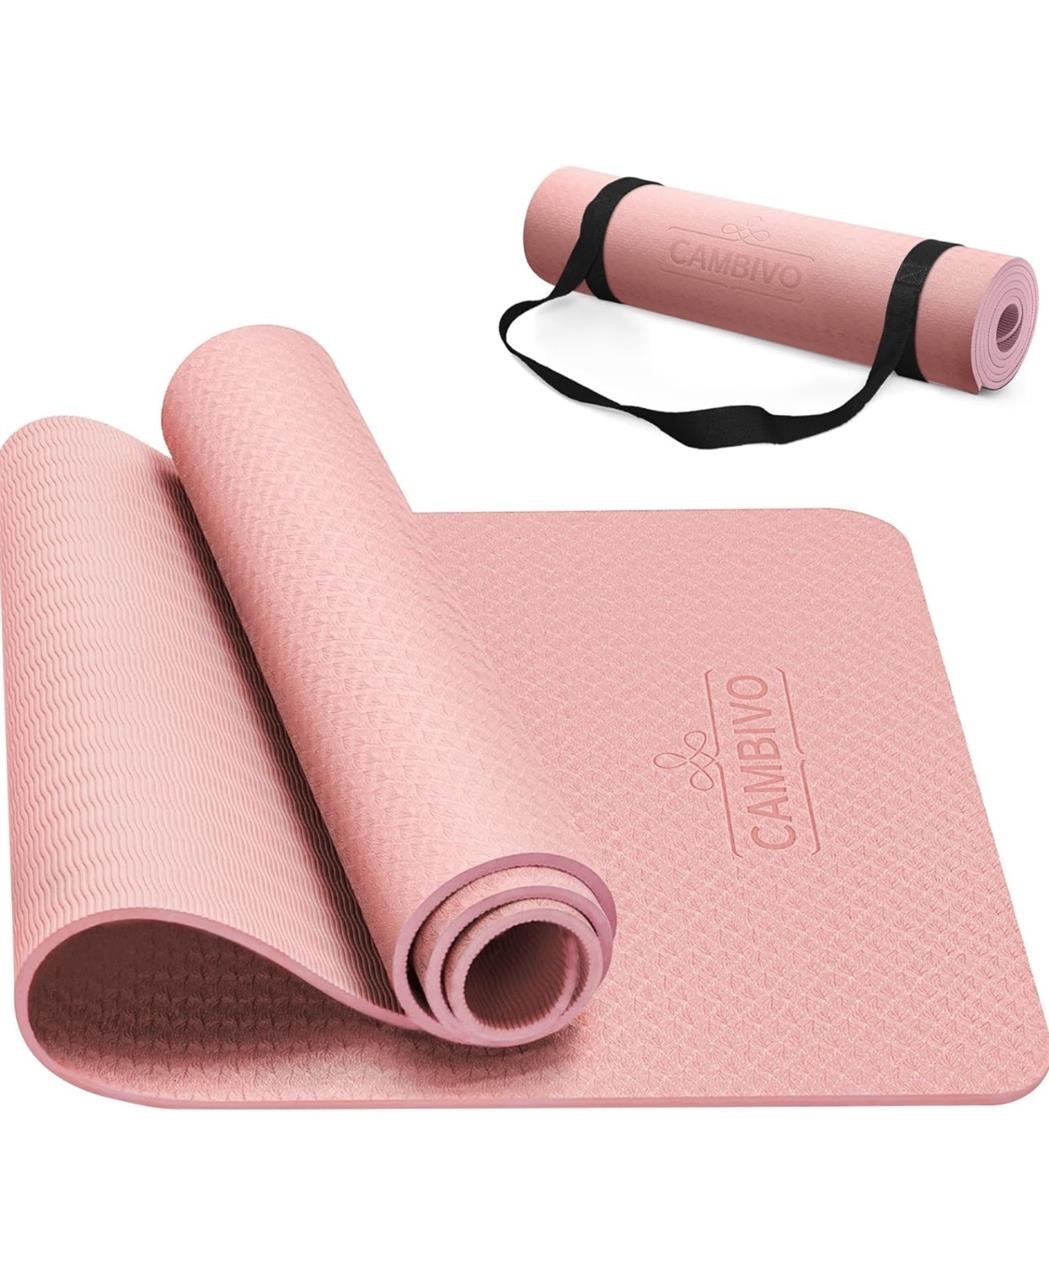 ($44) CAMBIVO Extra Thick Yoga Mat for Women